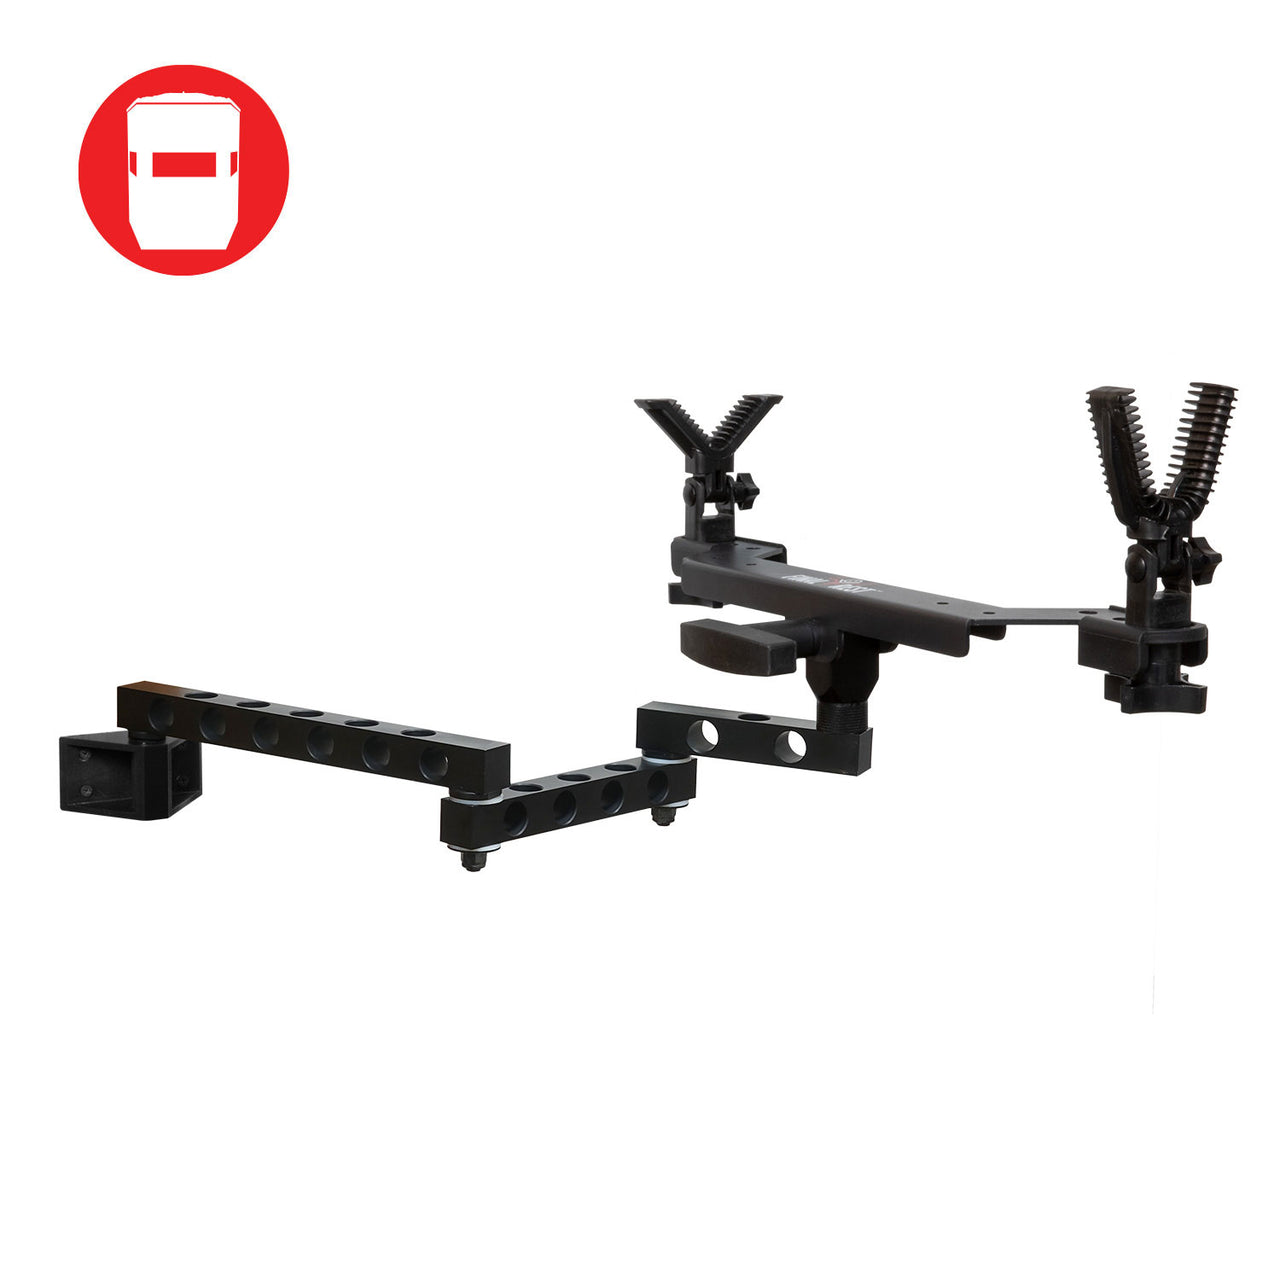 Fixed Blind Triple Arm Shooting Rest (KIT)